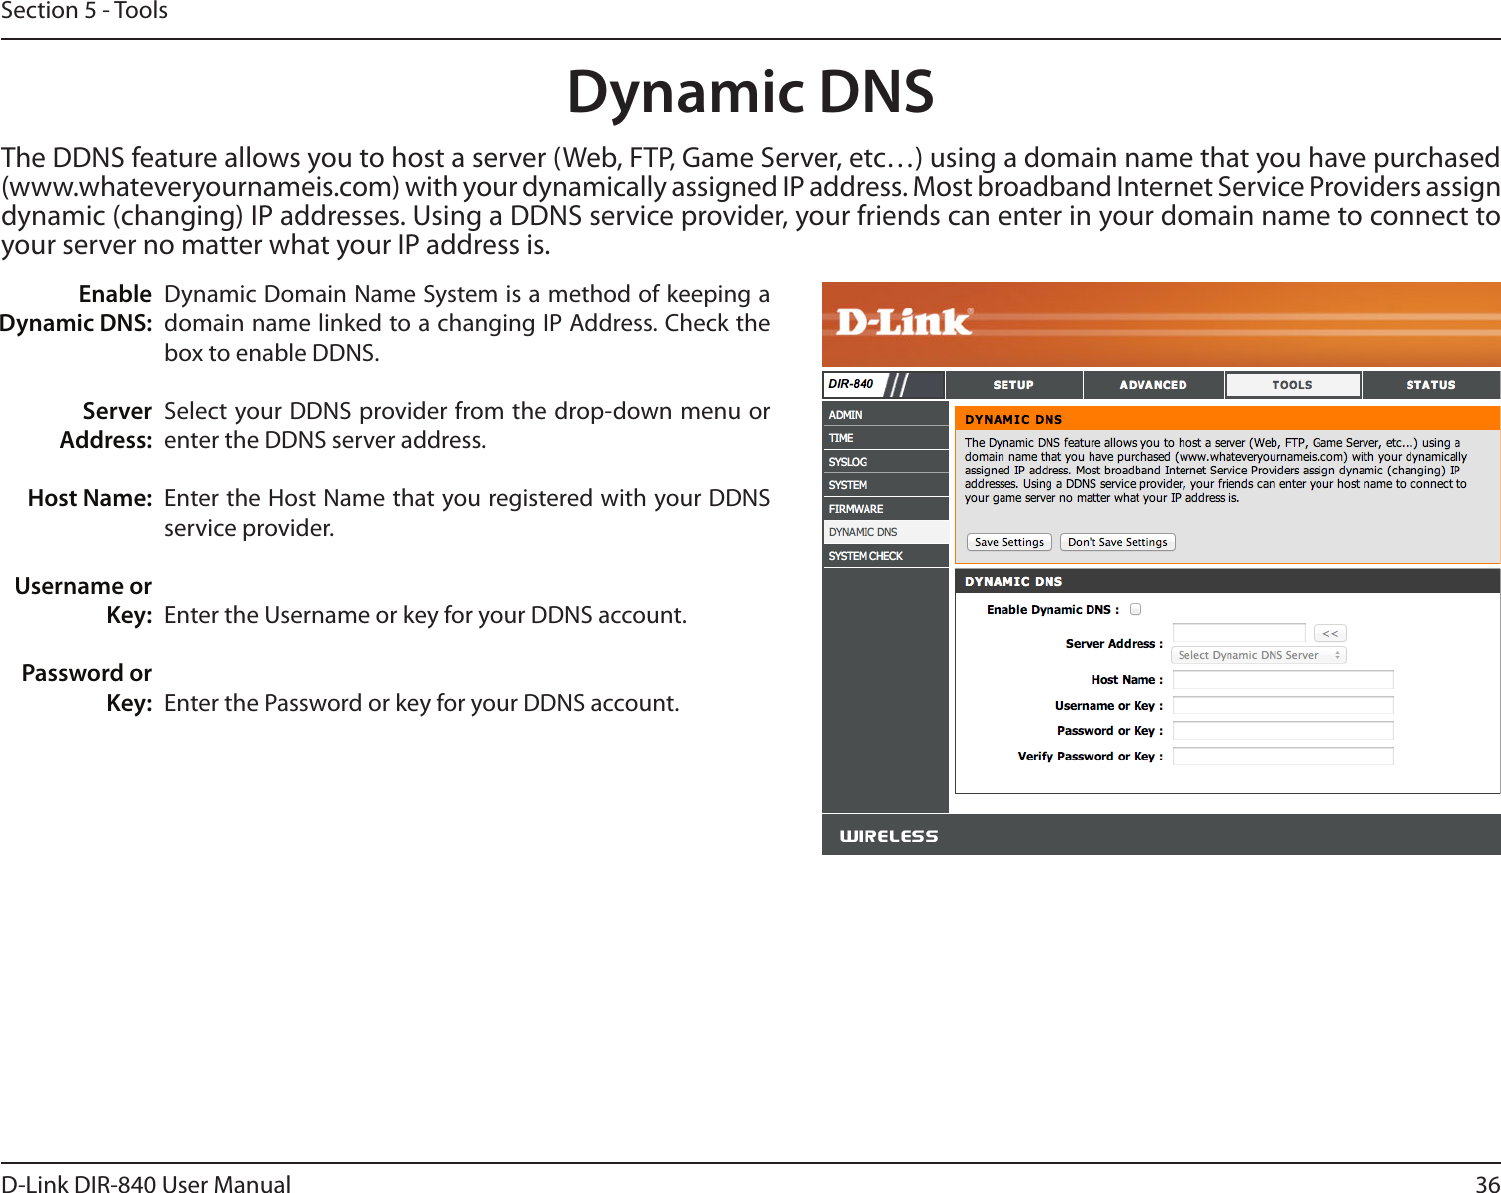 36D-Link DIR-840 User ManualSection 5 - ToolsDynamic Domain Name System is a method of keeping a domain name linked to a changing IP Address. Check the box to enable DDNS.Select your DDNS provider from the drop-down menu or enter the DDNS server address.Enter the Host Name that you registered with your DDNS service provider.Enter the Username or key for your DDNS account.Enter the Password or key for your DDNS account.Enable Dynamic DNS:Server Address:Host Name:Username or Key:Password or Key:Dynamic DNSThe DDNS feature allows you to host a server (Web, FTP, Game Server, etc…) using a domain name that you have purchased (www.whateveryournameis.com) with your dynamically assigned IP address. Most broadband Internet Service Providers assign dynamic (changing) IP addresses. Using a DDNS service provider, your friends can enter in your domain name to connect to your server no matter what your IP address is.